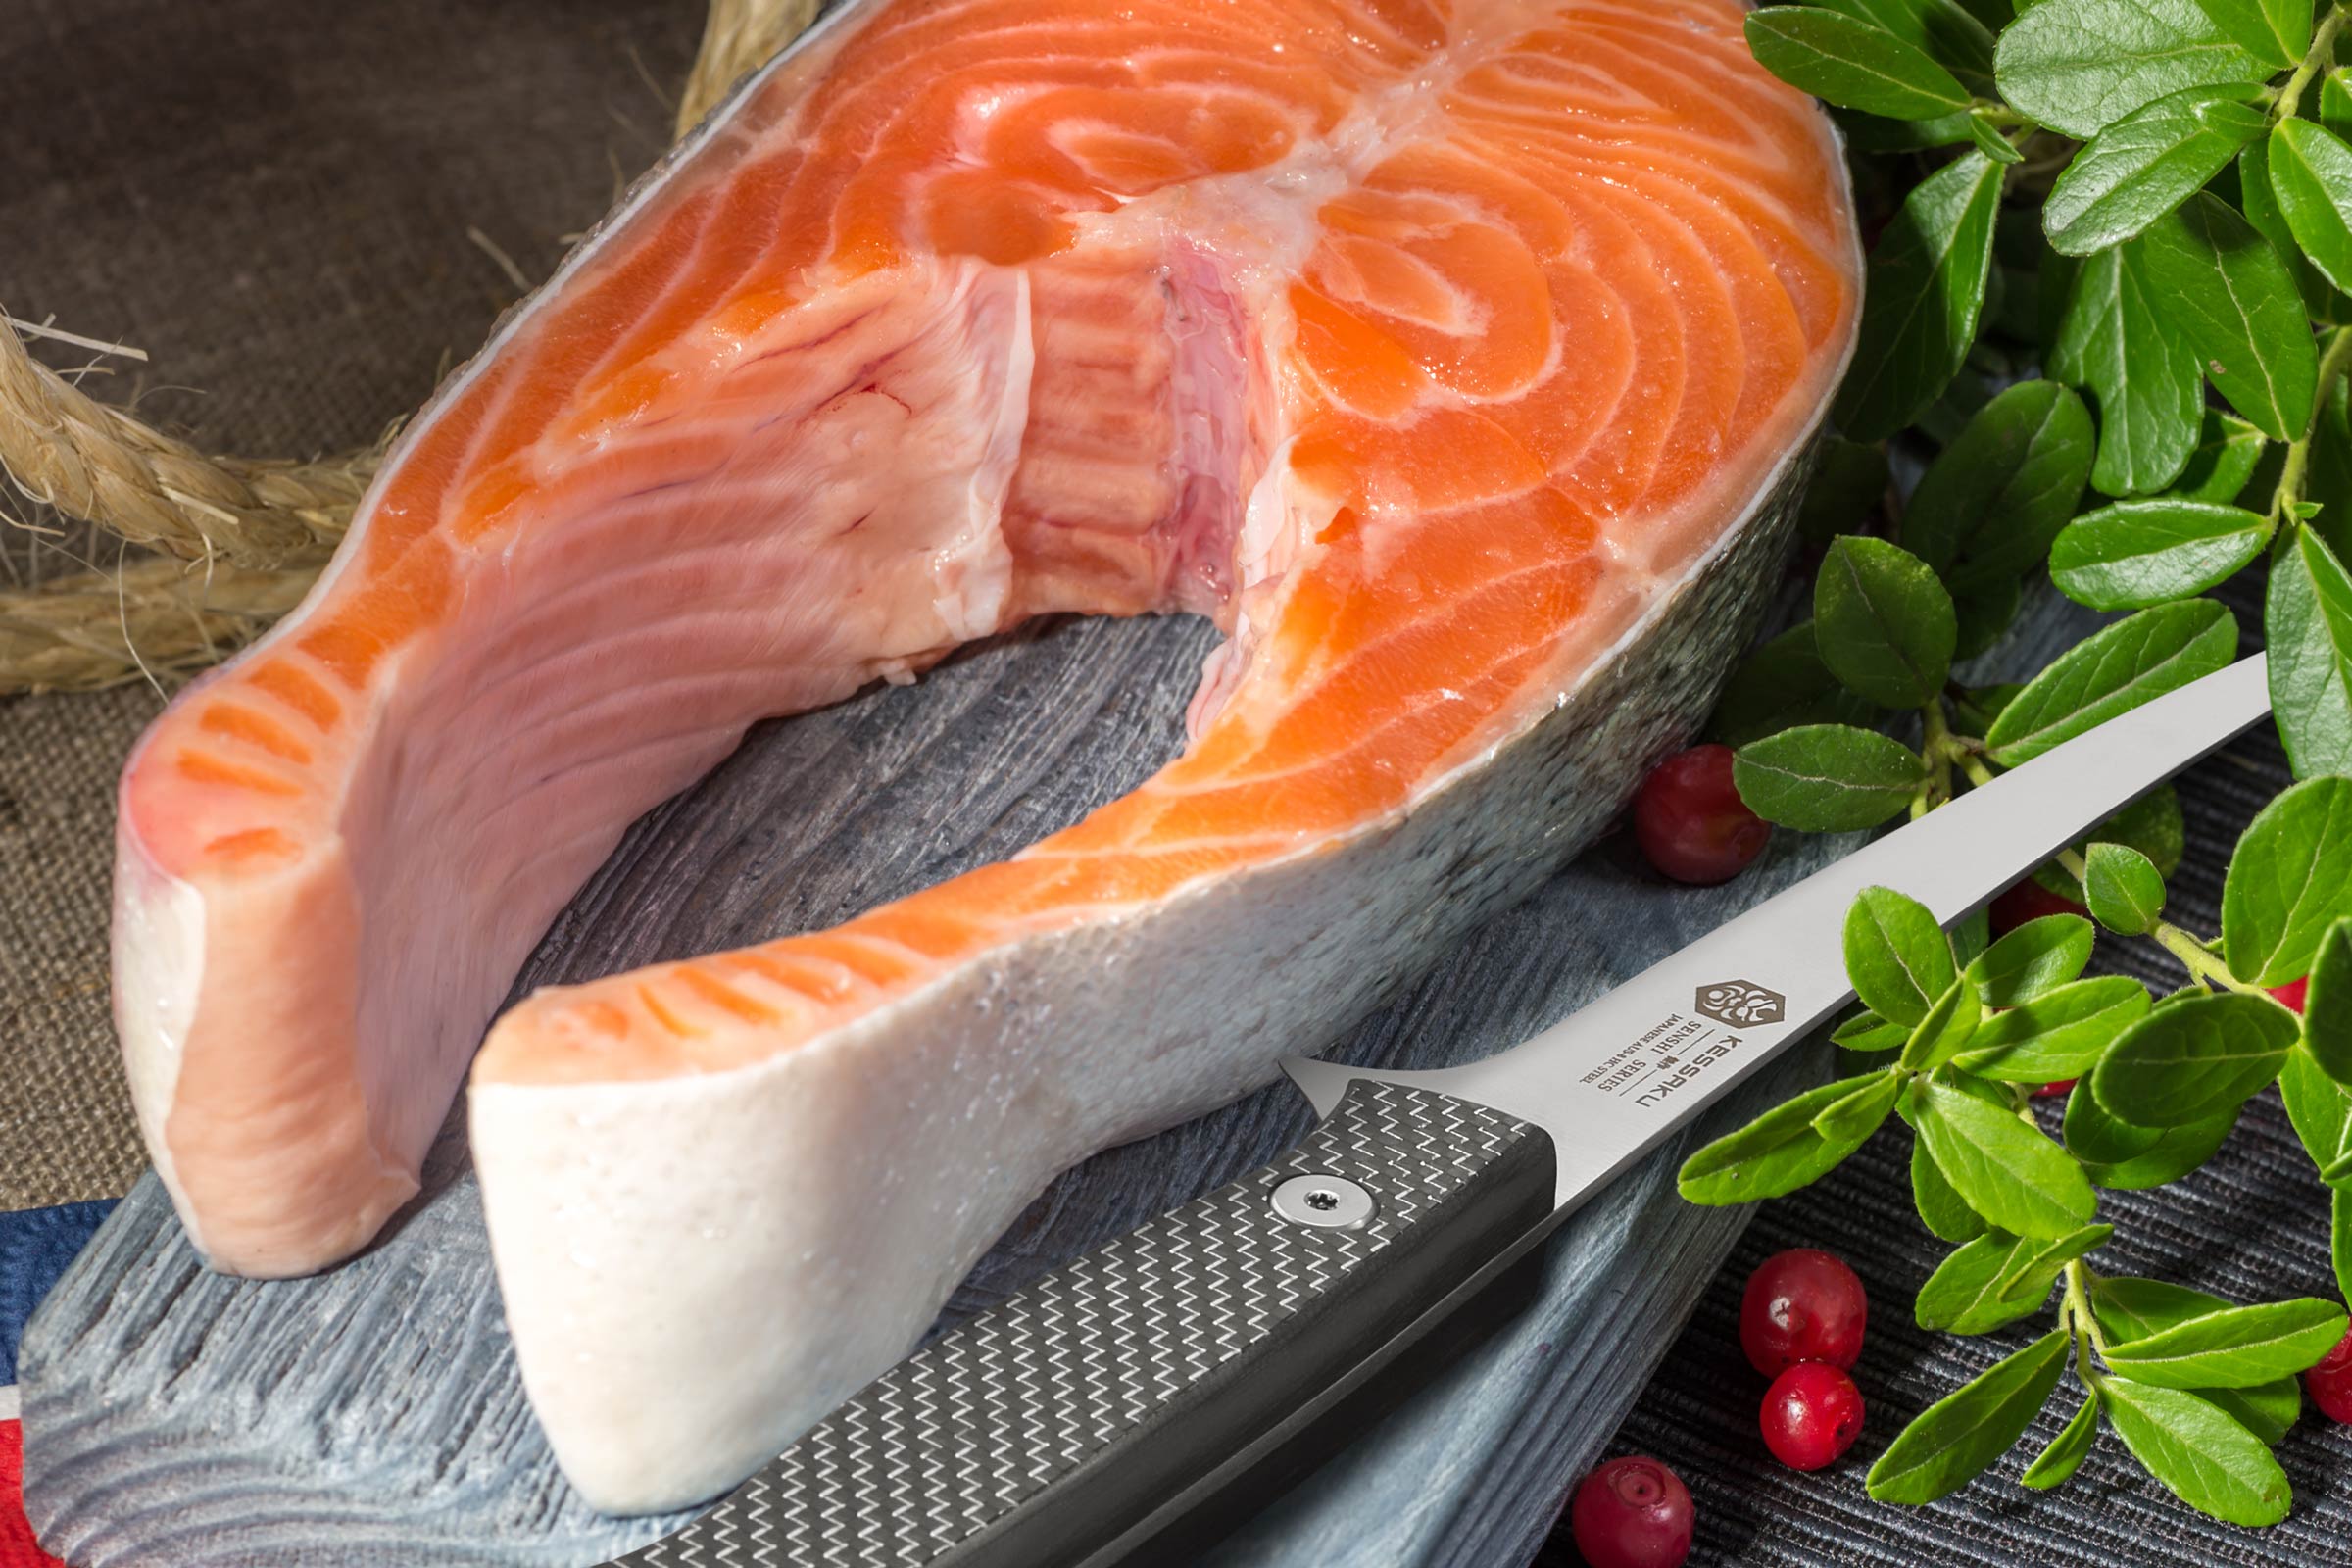 The Senshi FIllet Knife lays next to a perfect trimming king salmon.